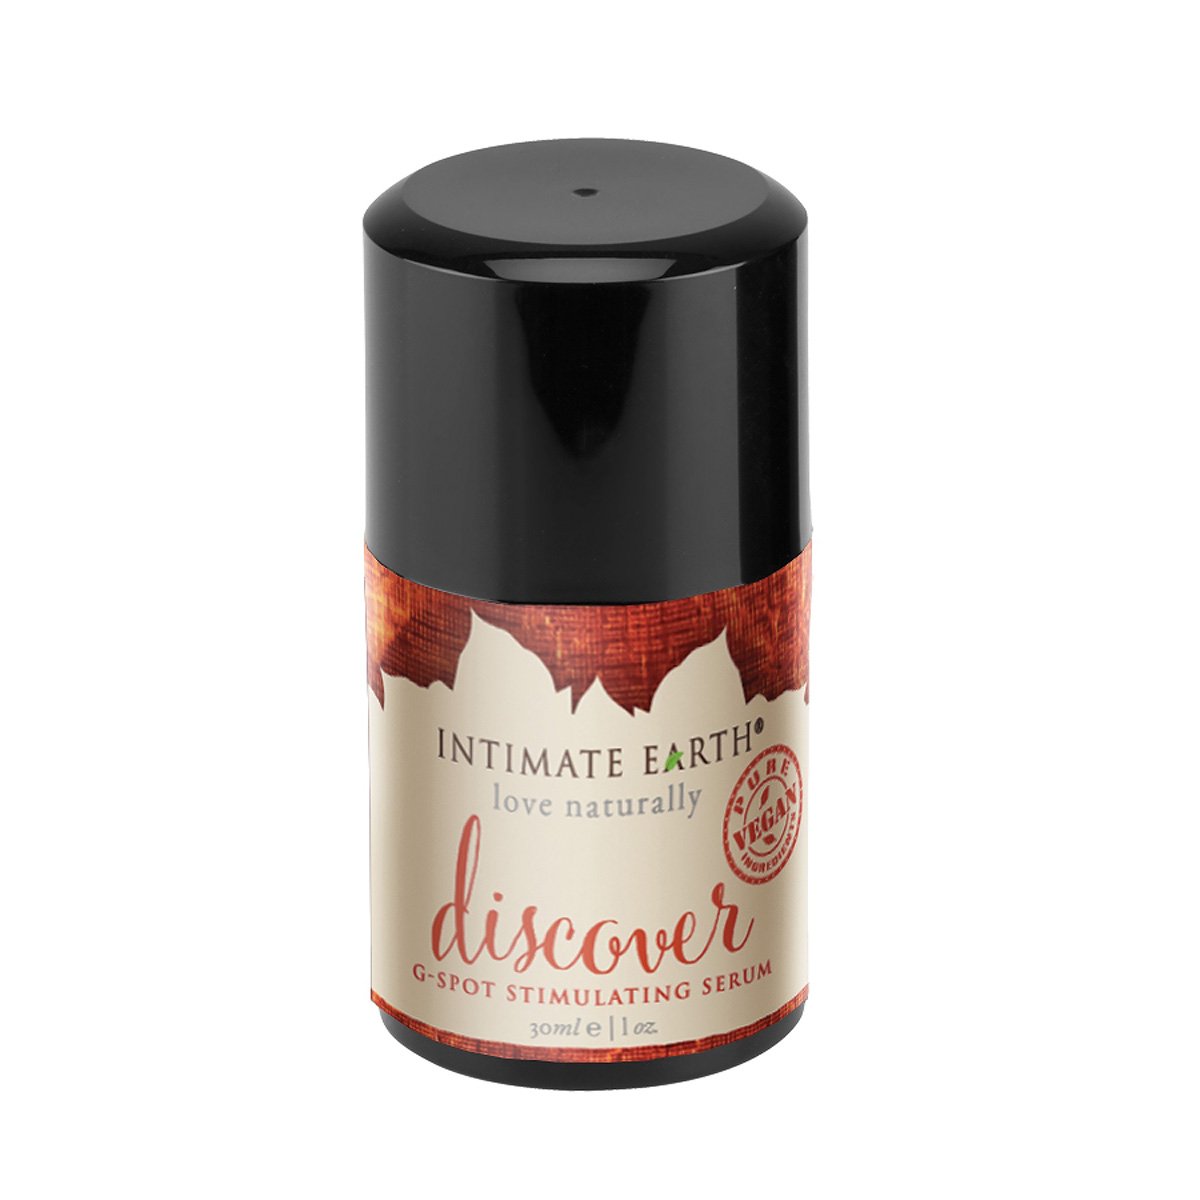 Intimate Earth Discover G-Spot Serum 1 oz. - Buy At Luxury Toy X - Free 3-Day Shipping